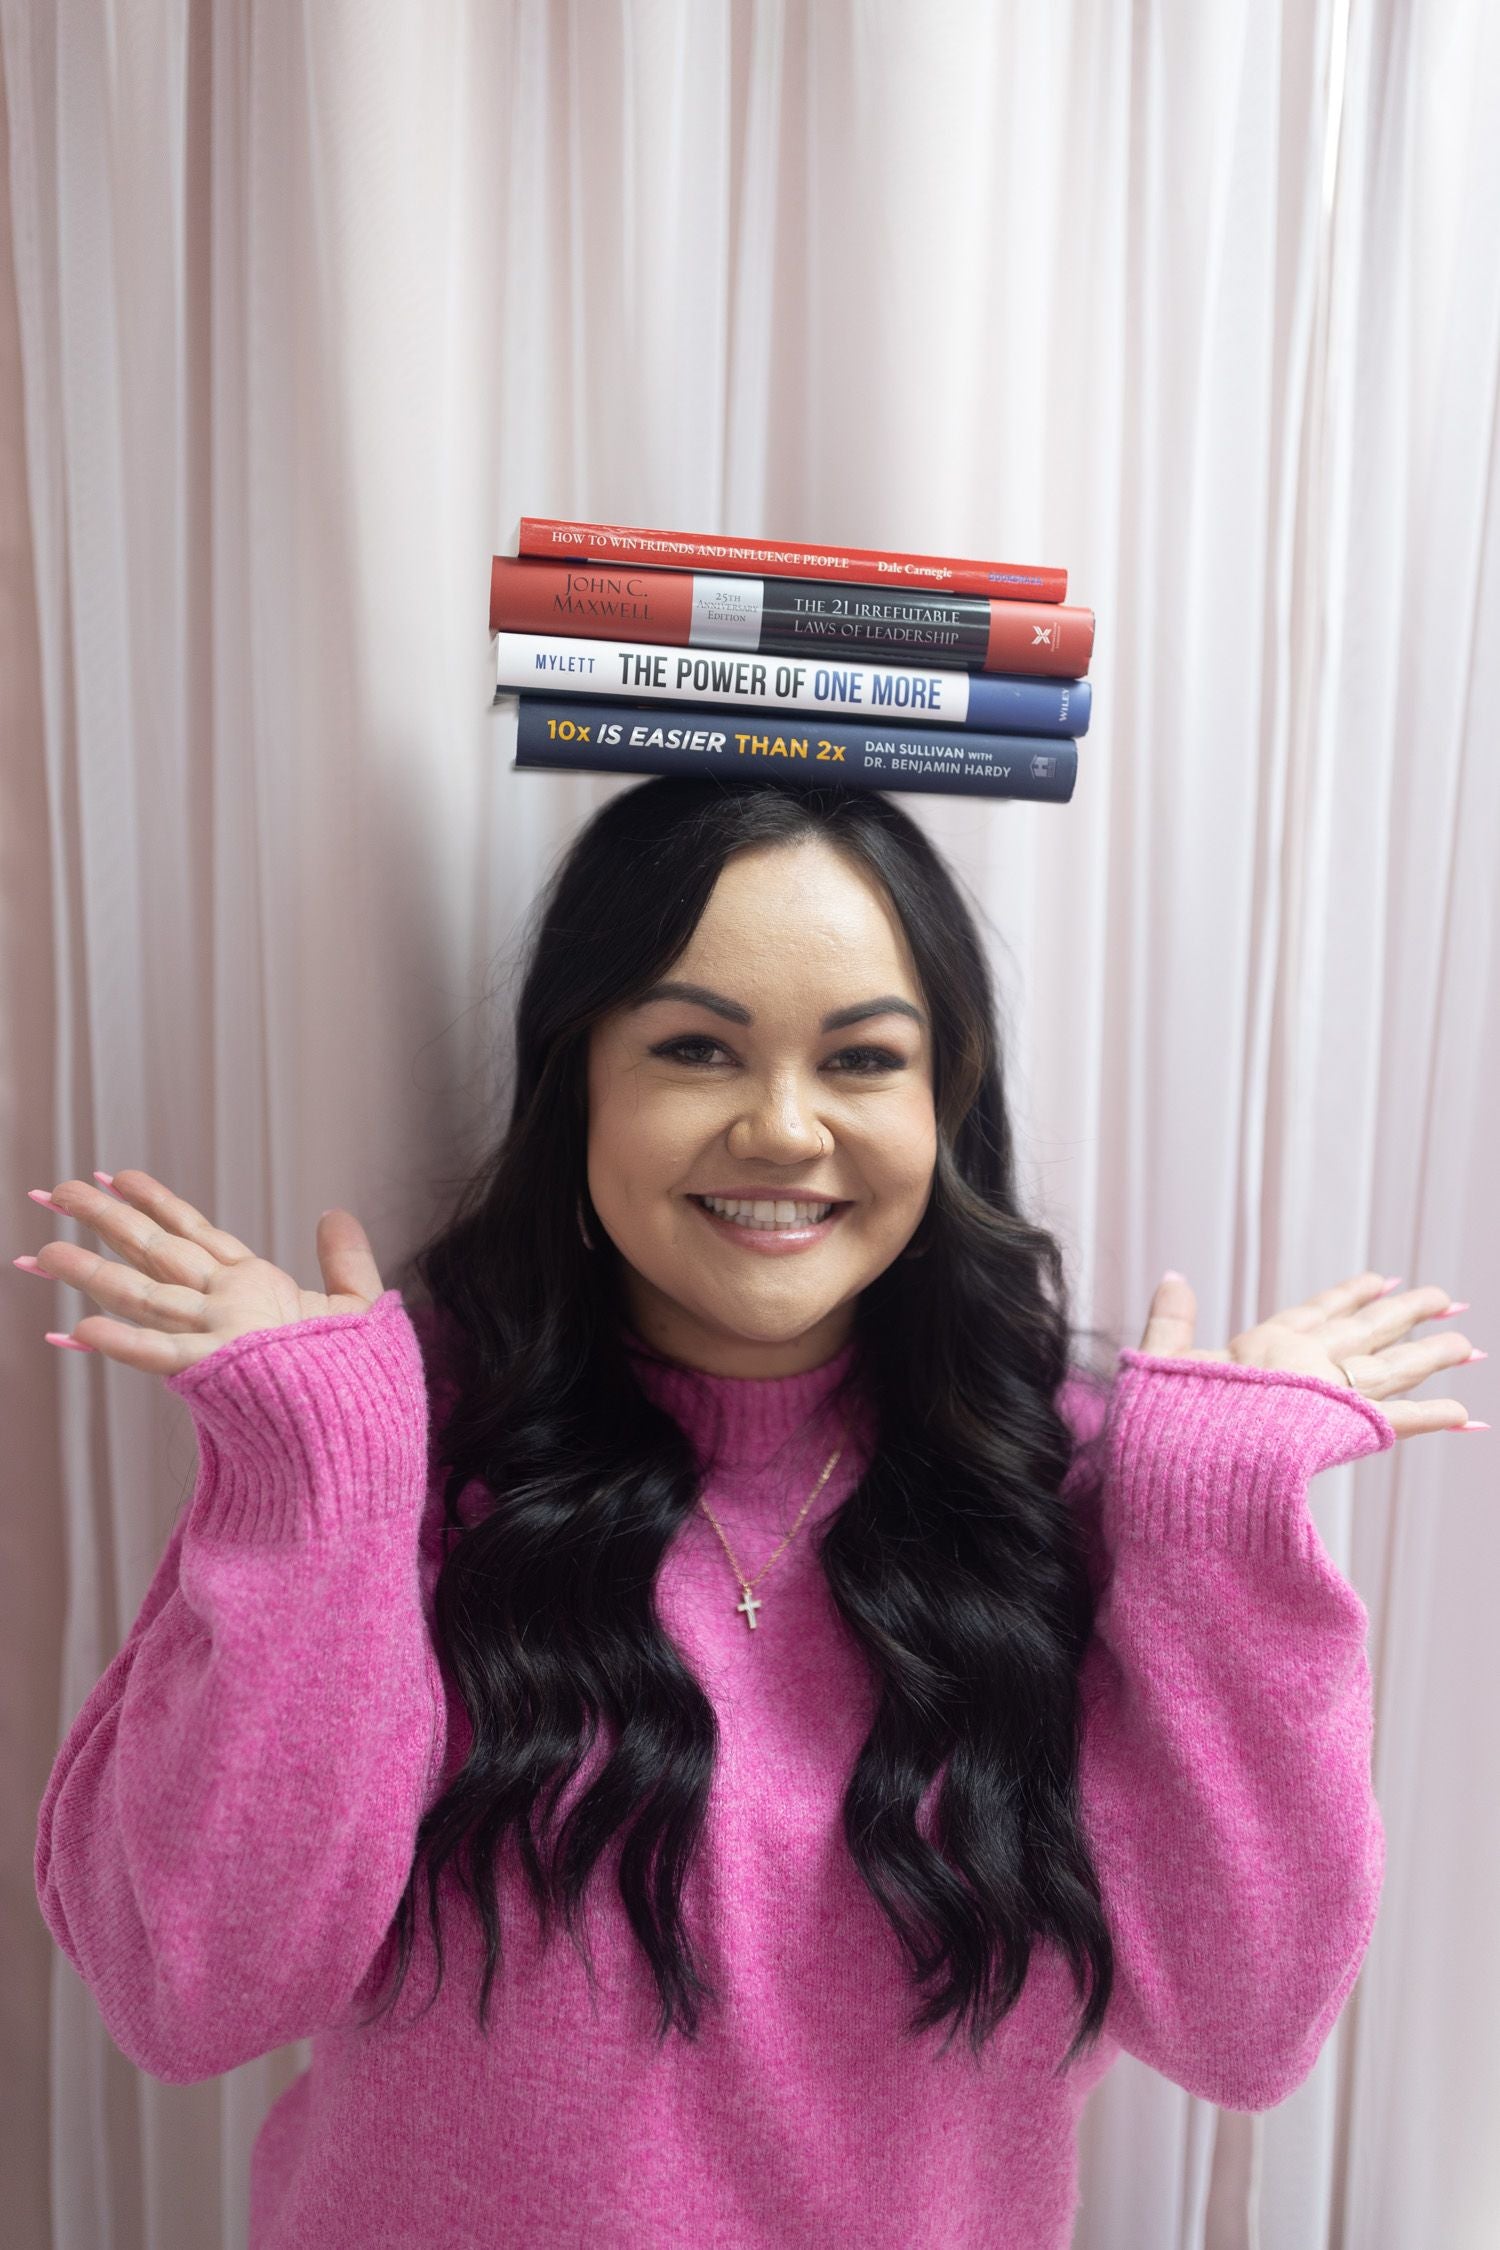 Photo of Lash and Wax OC owner Bree smiling while balancing a stack of books on her head.